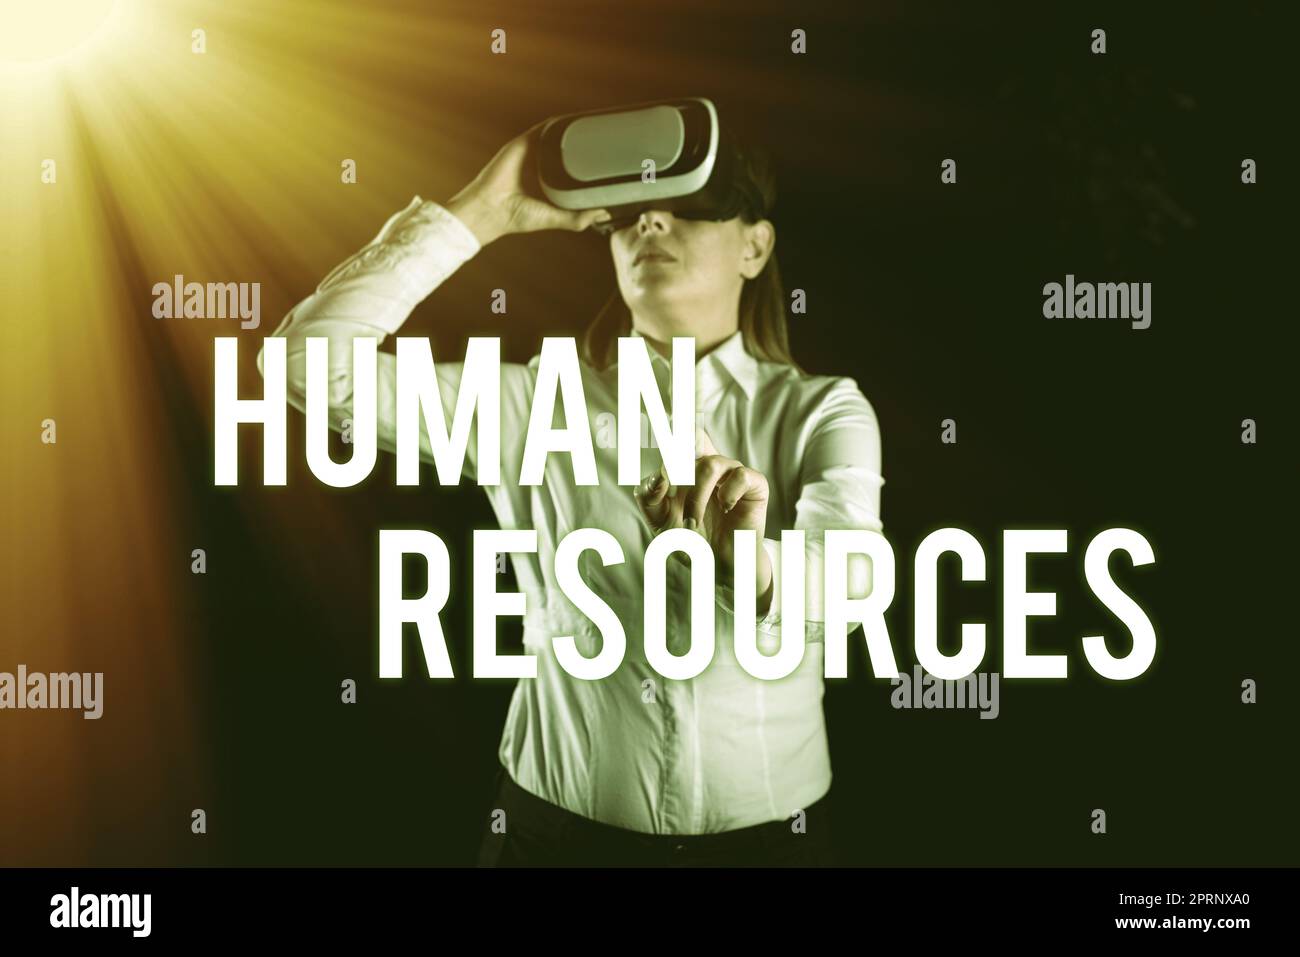 Text sign showing Human ResourcesThe people who make up the workforce of an organization. Concept meaning The showing who make up the workforce of an organization Stock Photo